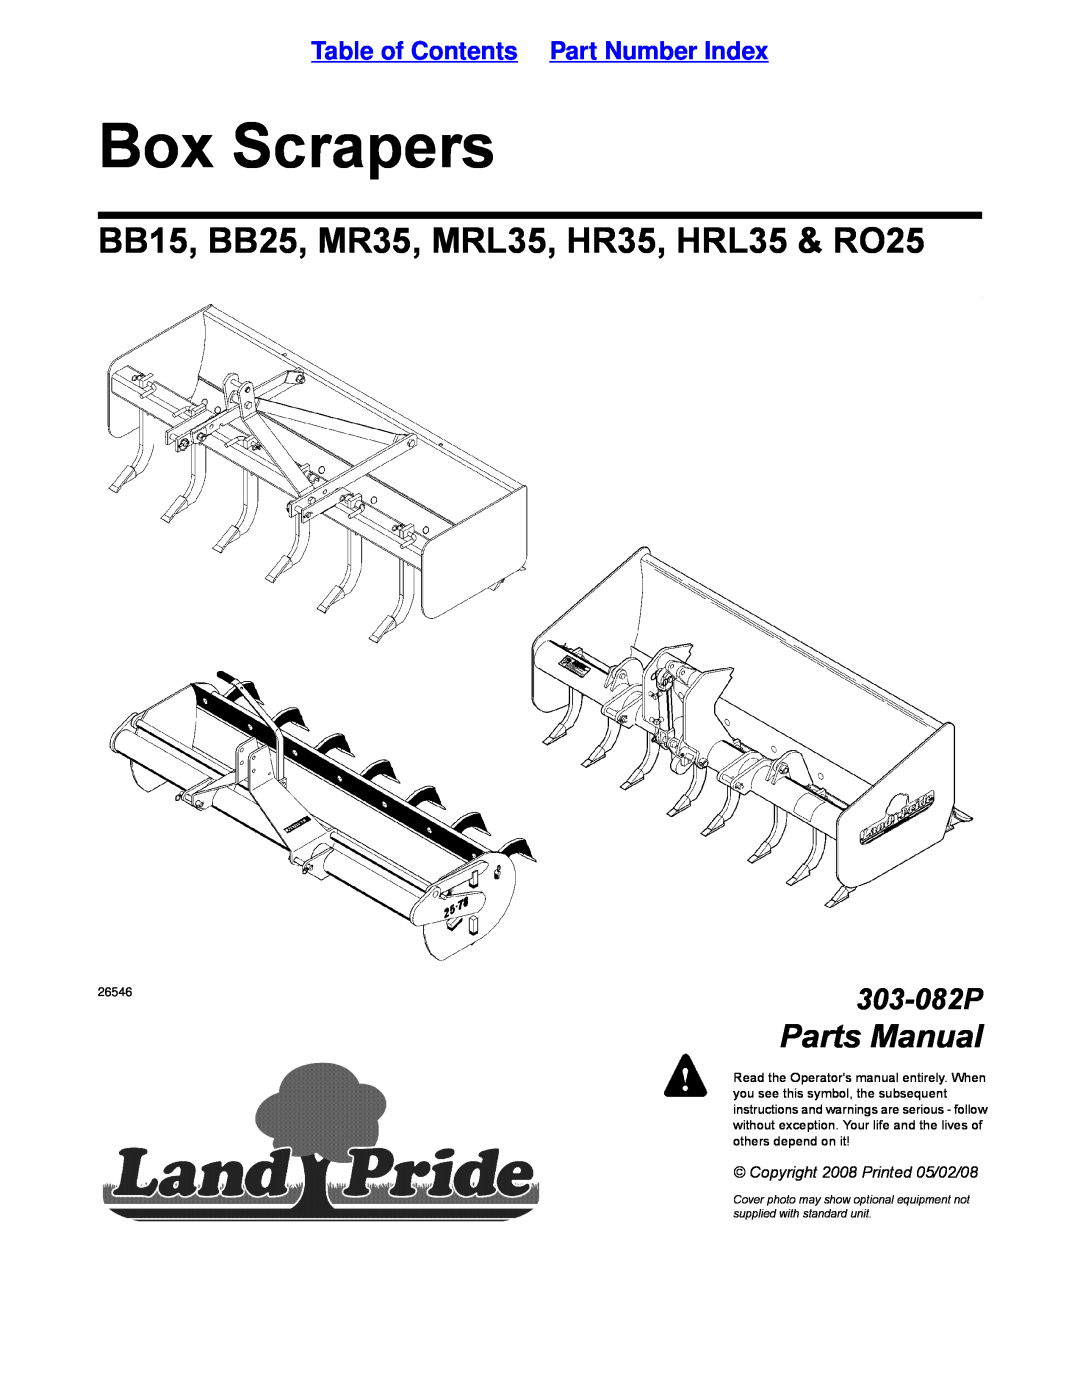 Land Pride manual Table of Contents Part Number Index, Box Scrapers, BB15, BB25, MR35, MRL35, HR35, HRL35 & RO25 